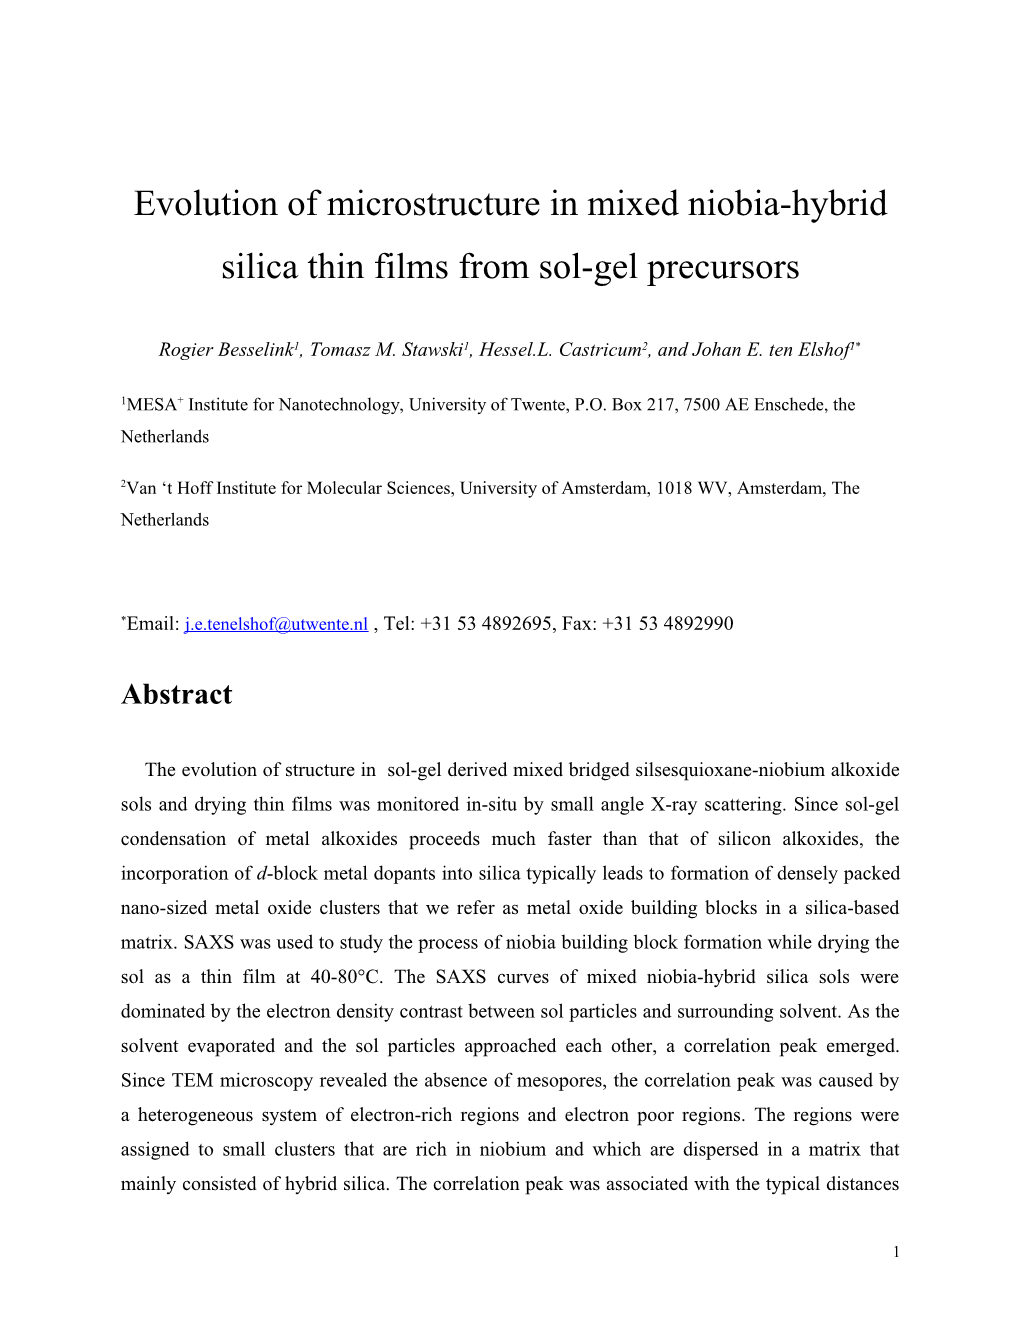 Evolution of Microstructure in Mixed Niobia-Hybrid Bridged Silsesquioxane Silica Thin Films